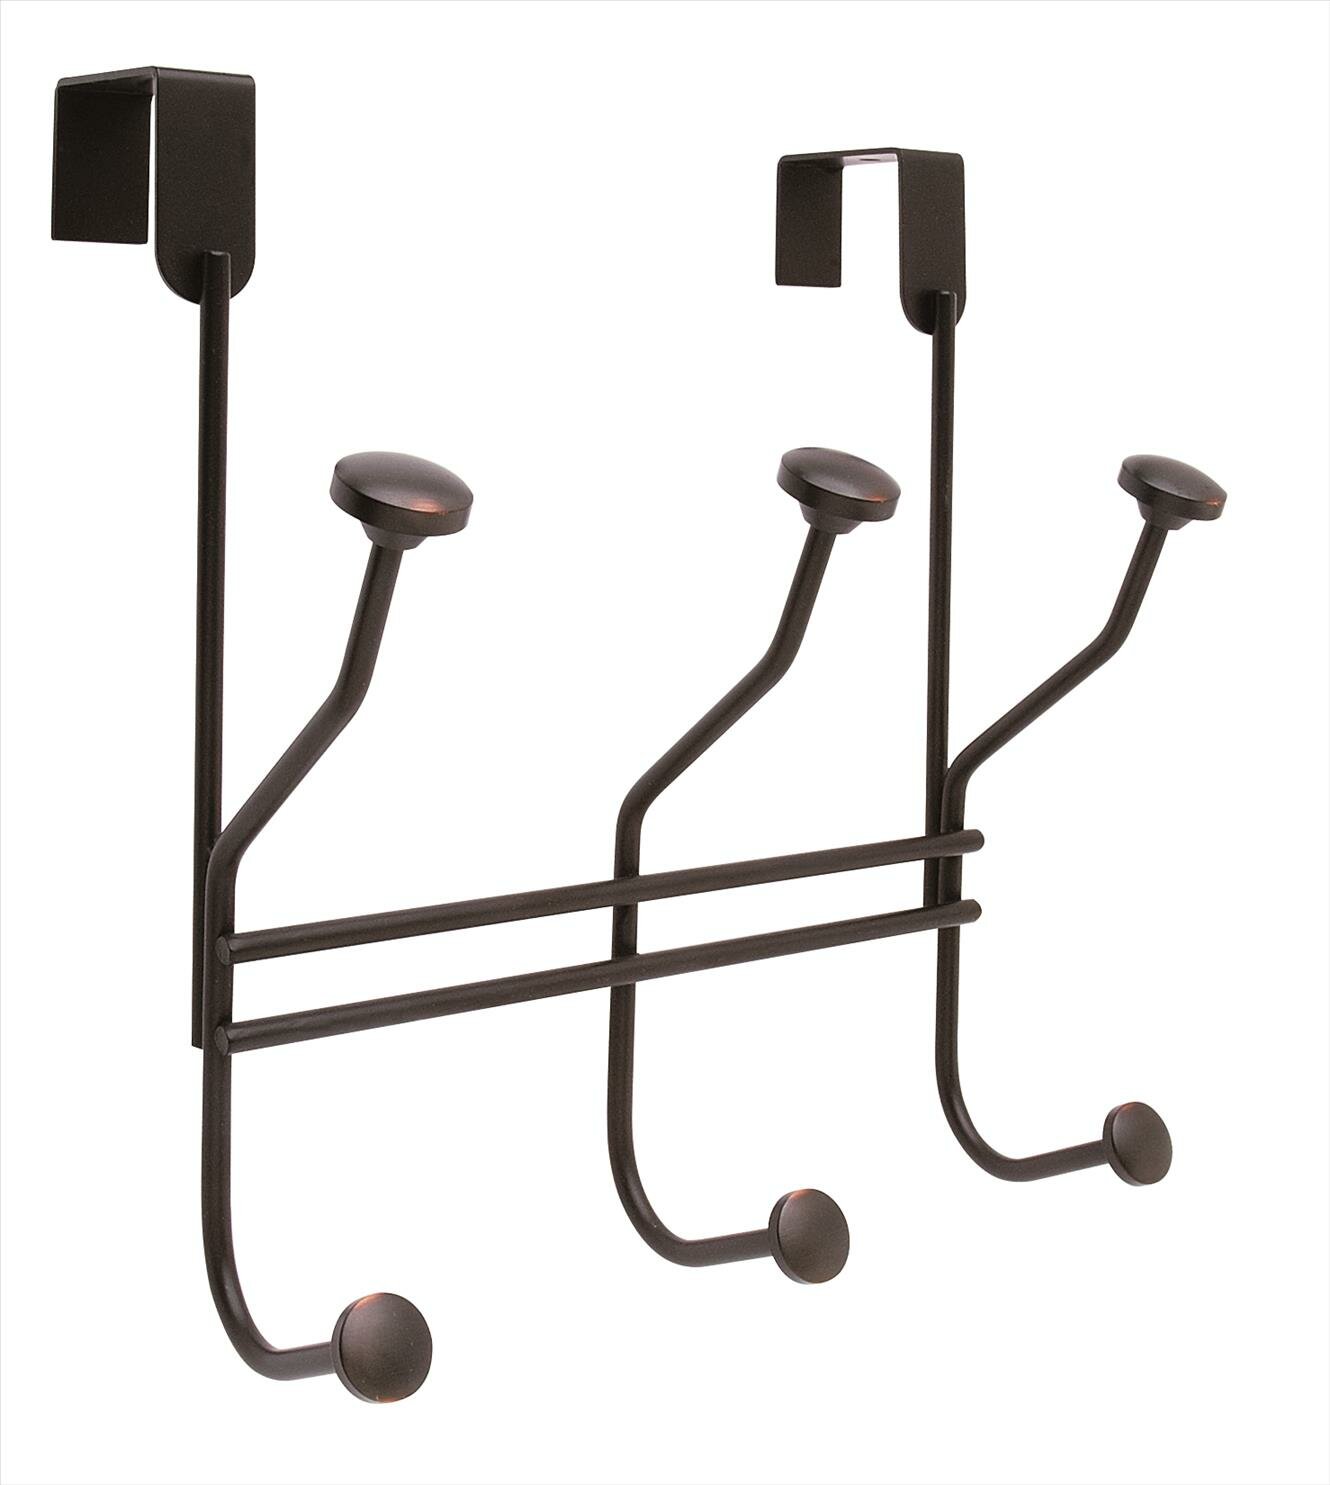 Mainstays Hook Rack with 6 Towel Hooks - Oil Rubbed Bronze - 1 Each